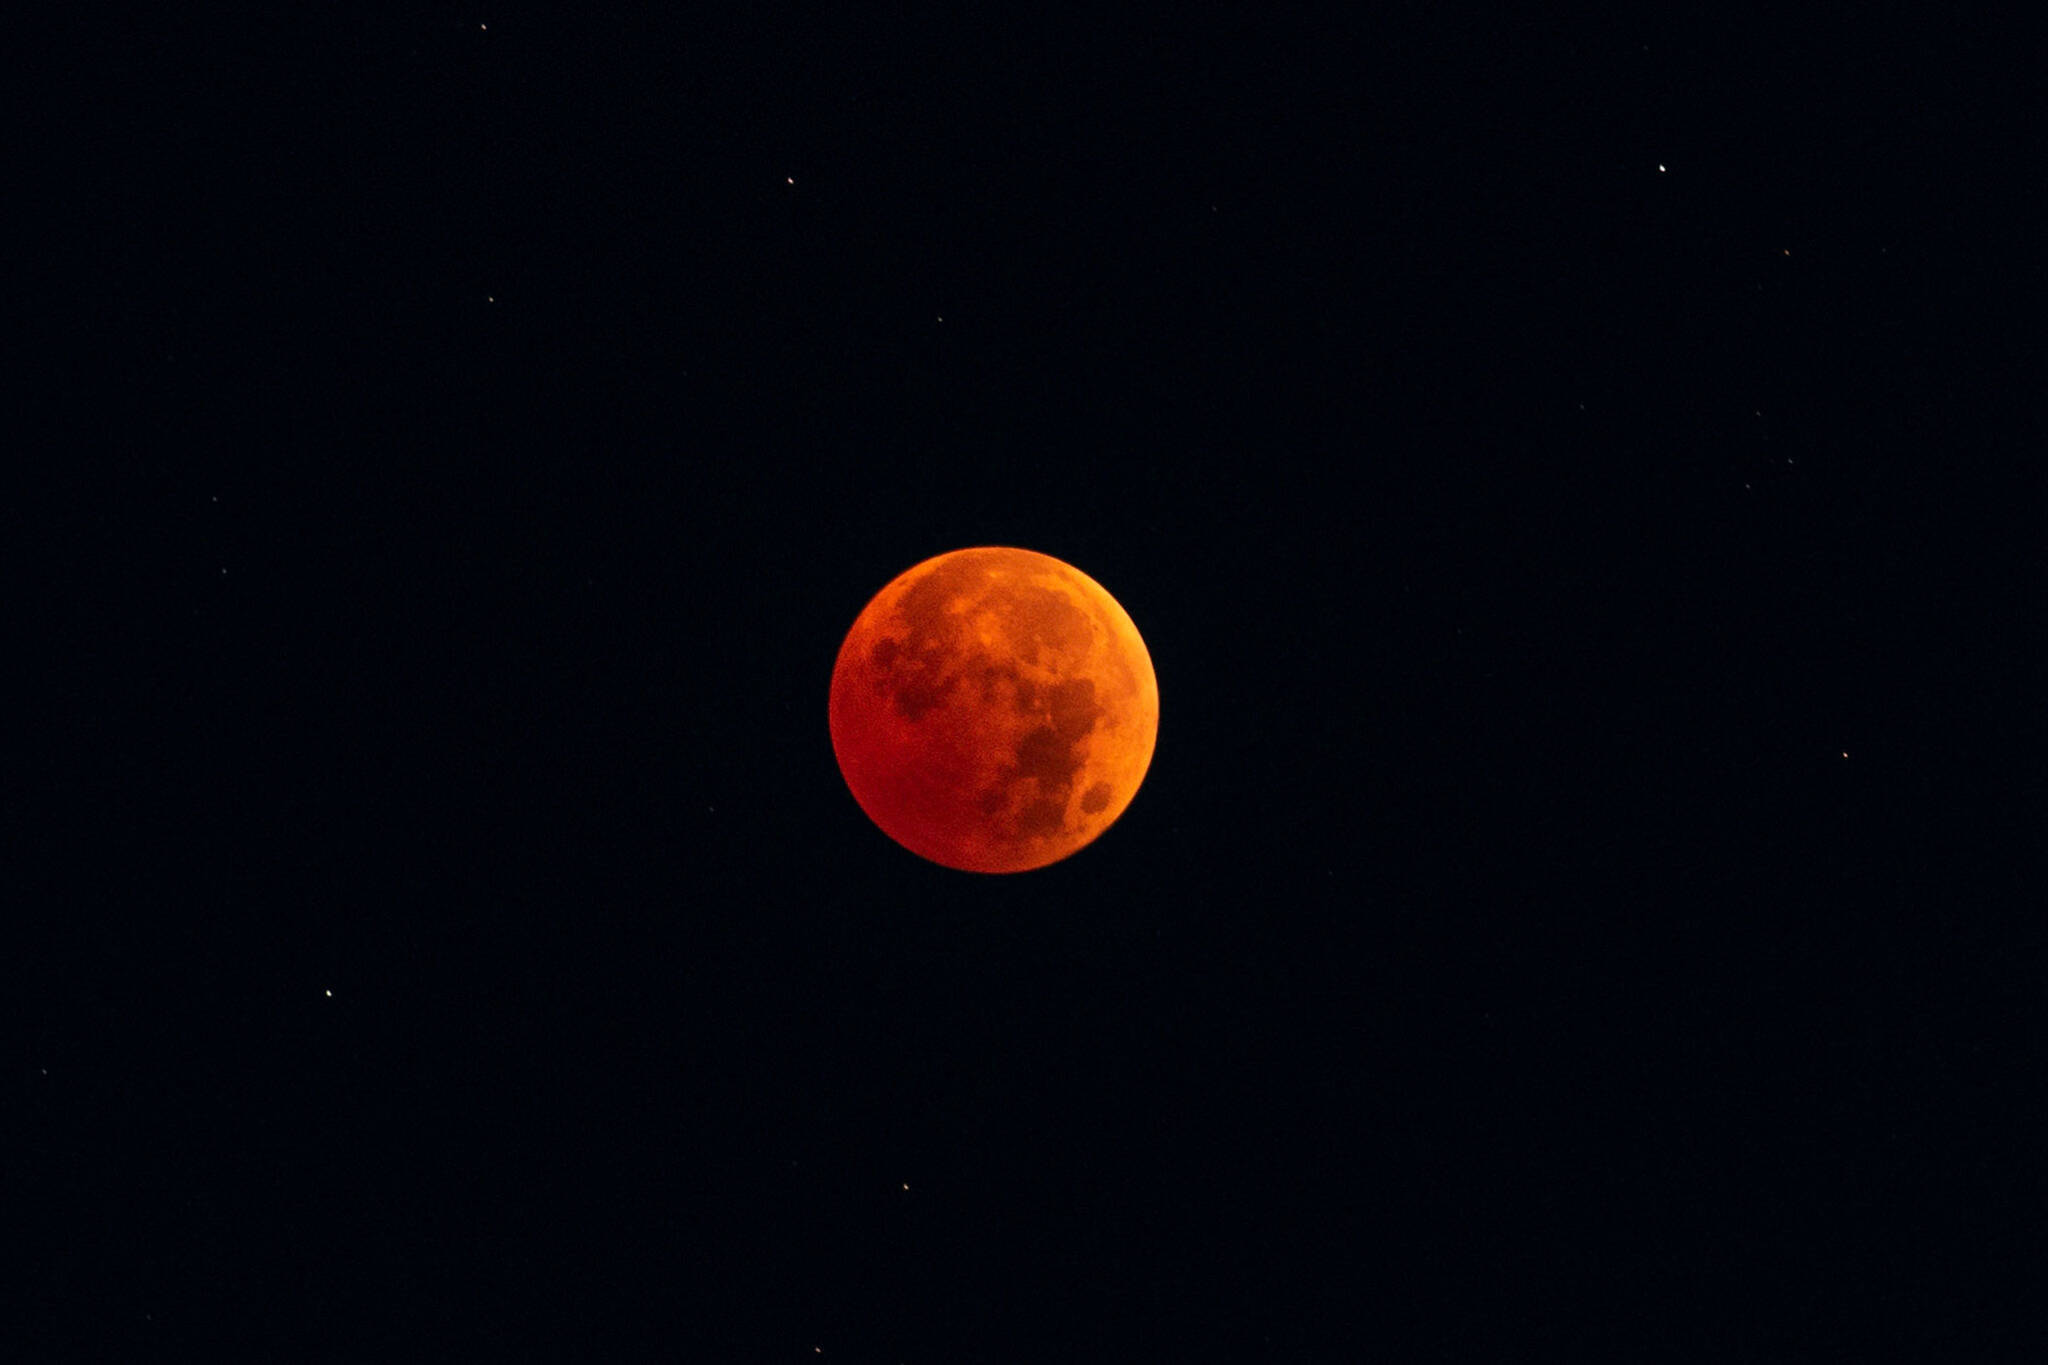 Toronto woke up early for a rare lunar eclipse and the photos are